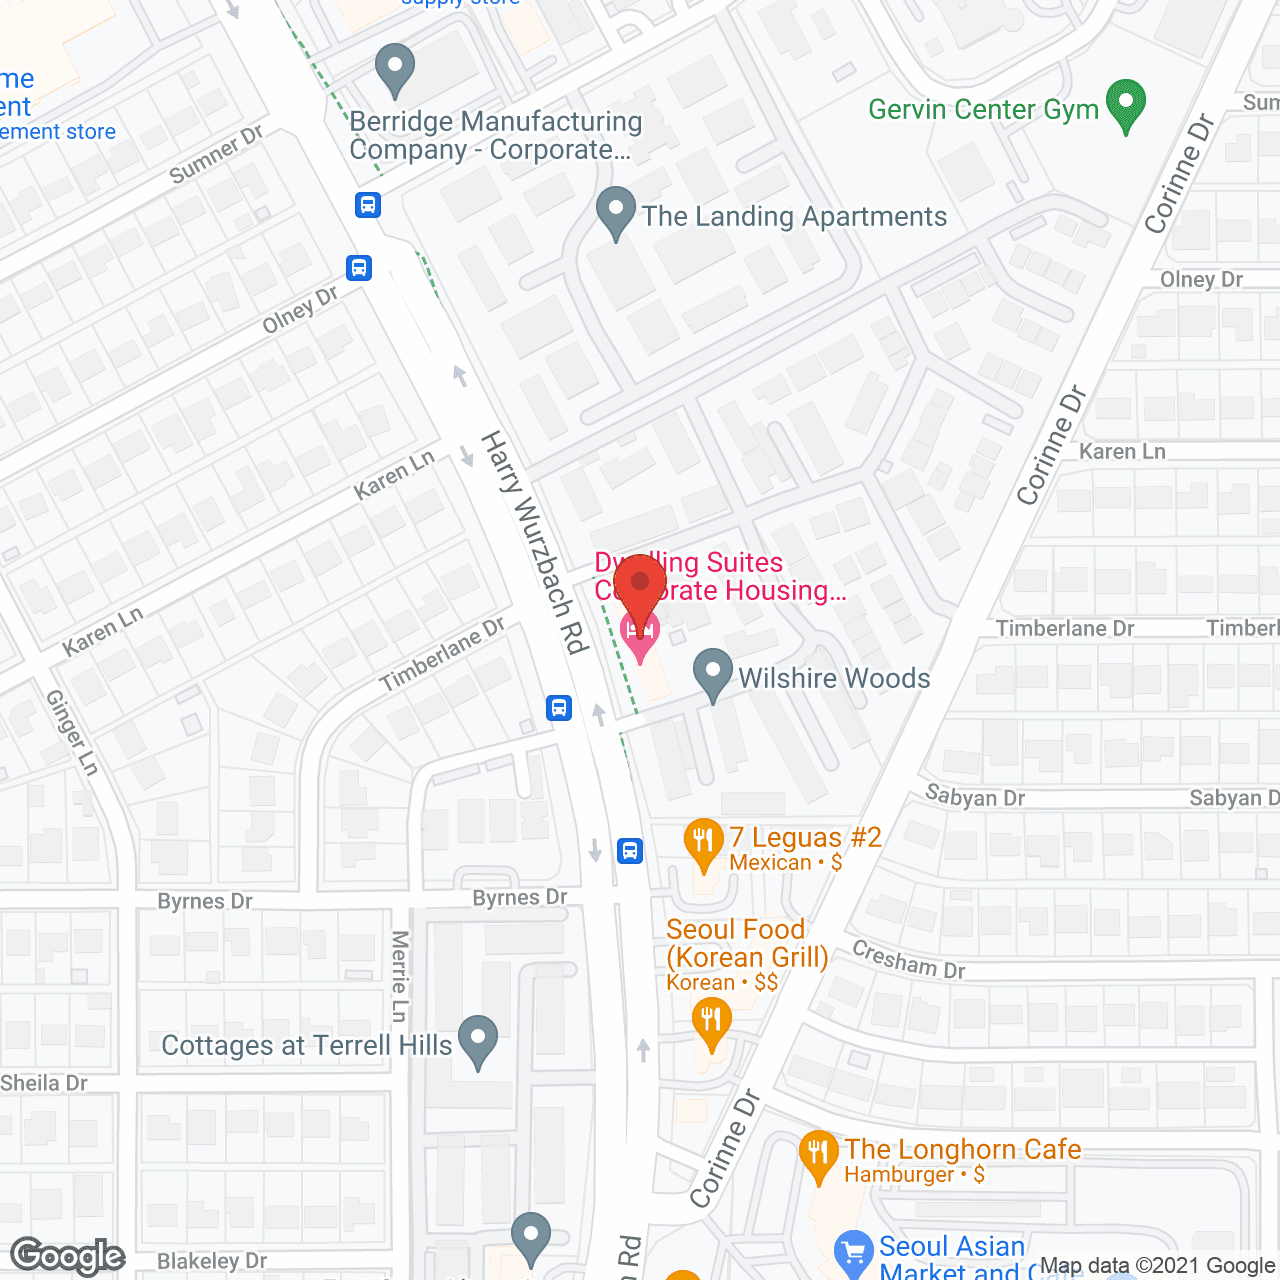 Wilshire Woods Apartments in google map